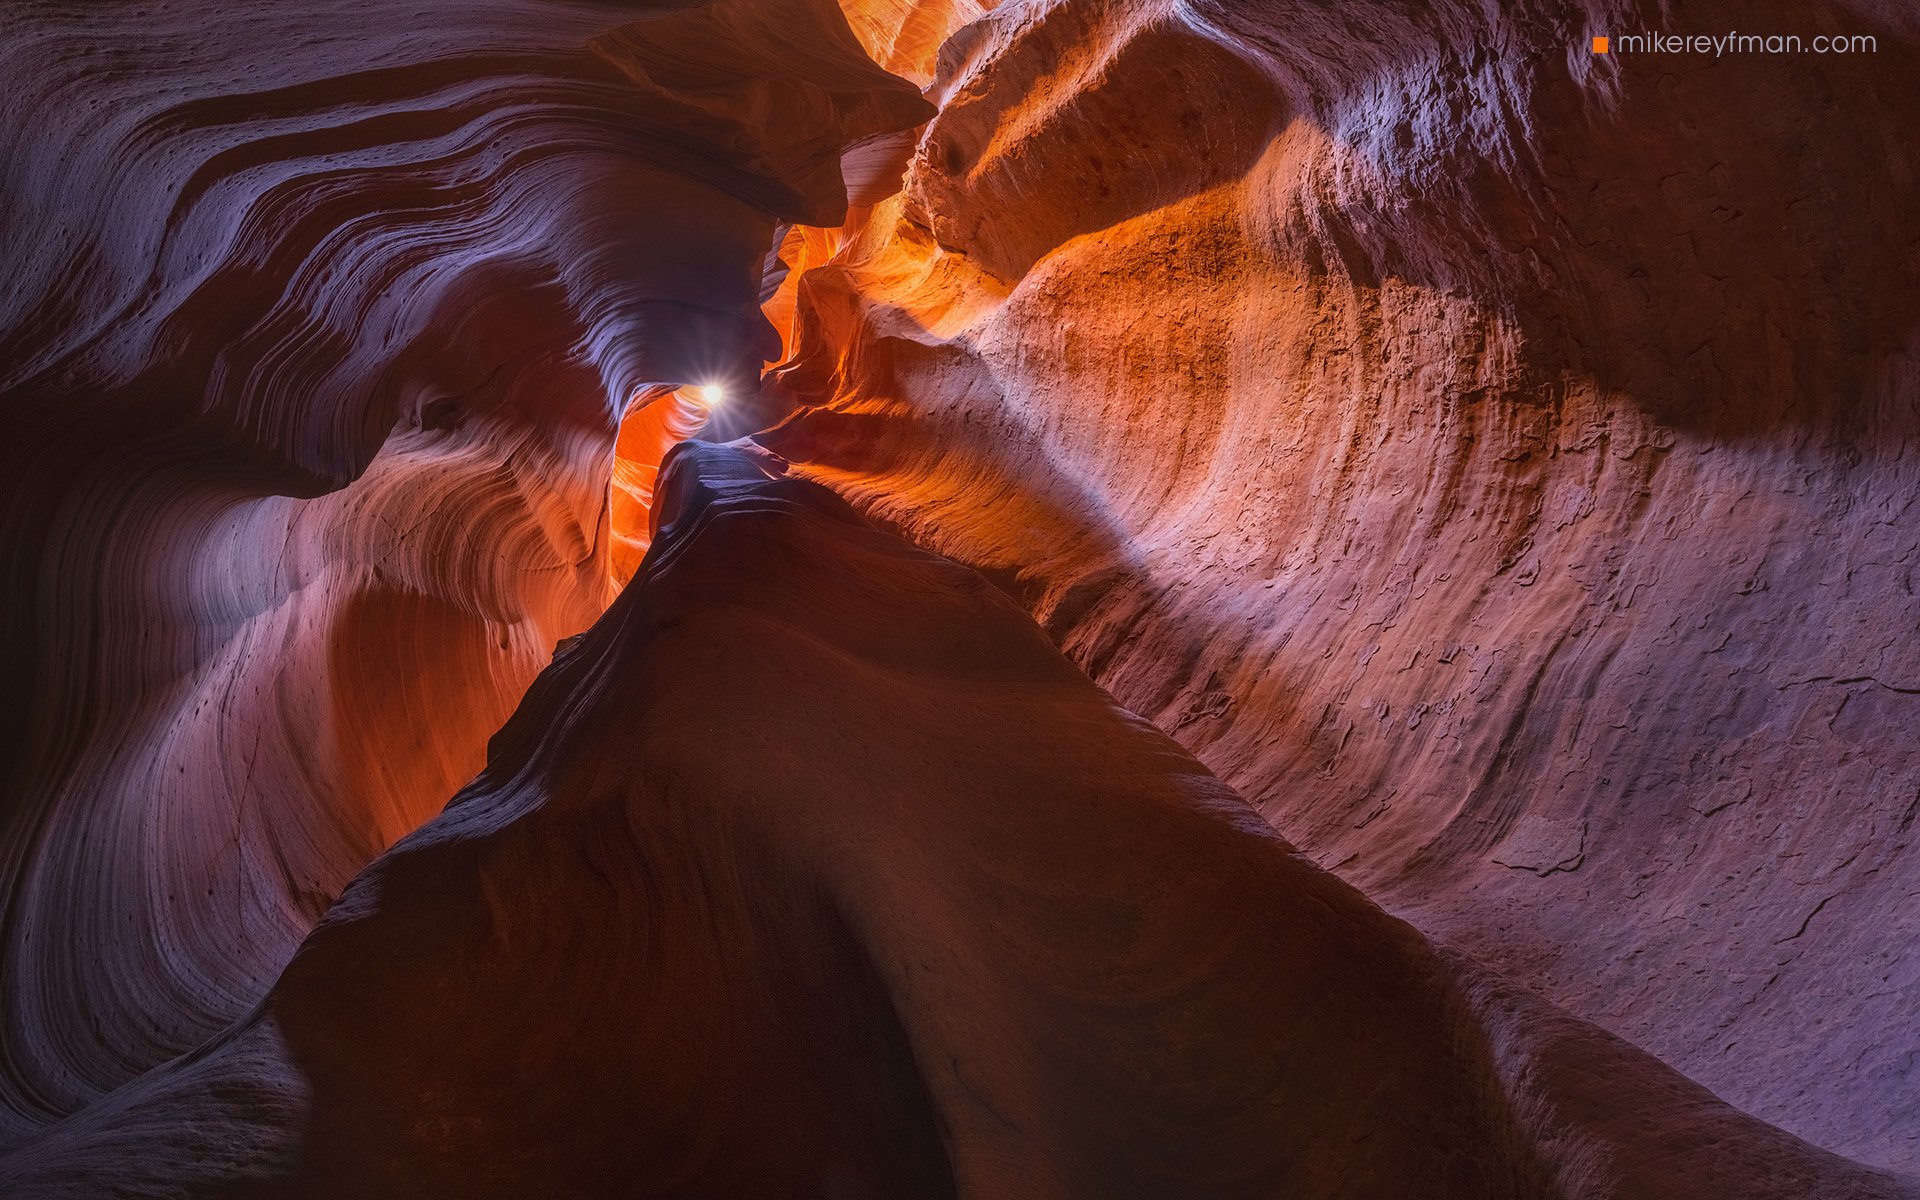 eroded, natural landmark, orange color, antelope canyon х, canyon, abstract, arid climate, arizona, awe, beauty in nature, bizarre, cave, color, extreme terrain, rock formation, sandstone, slot canyon, textured effect, usa, vibrant color, Майк Рейфман